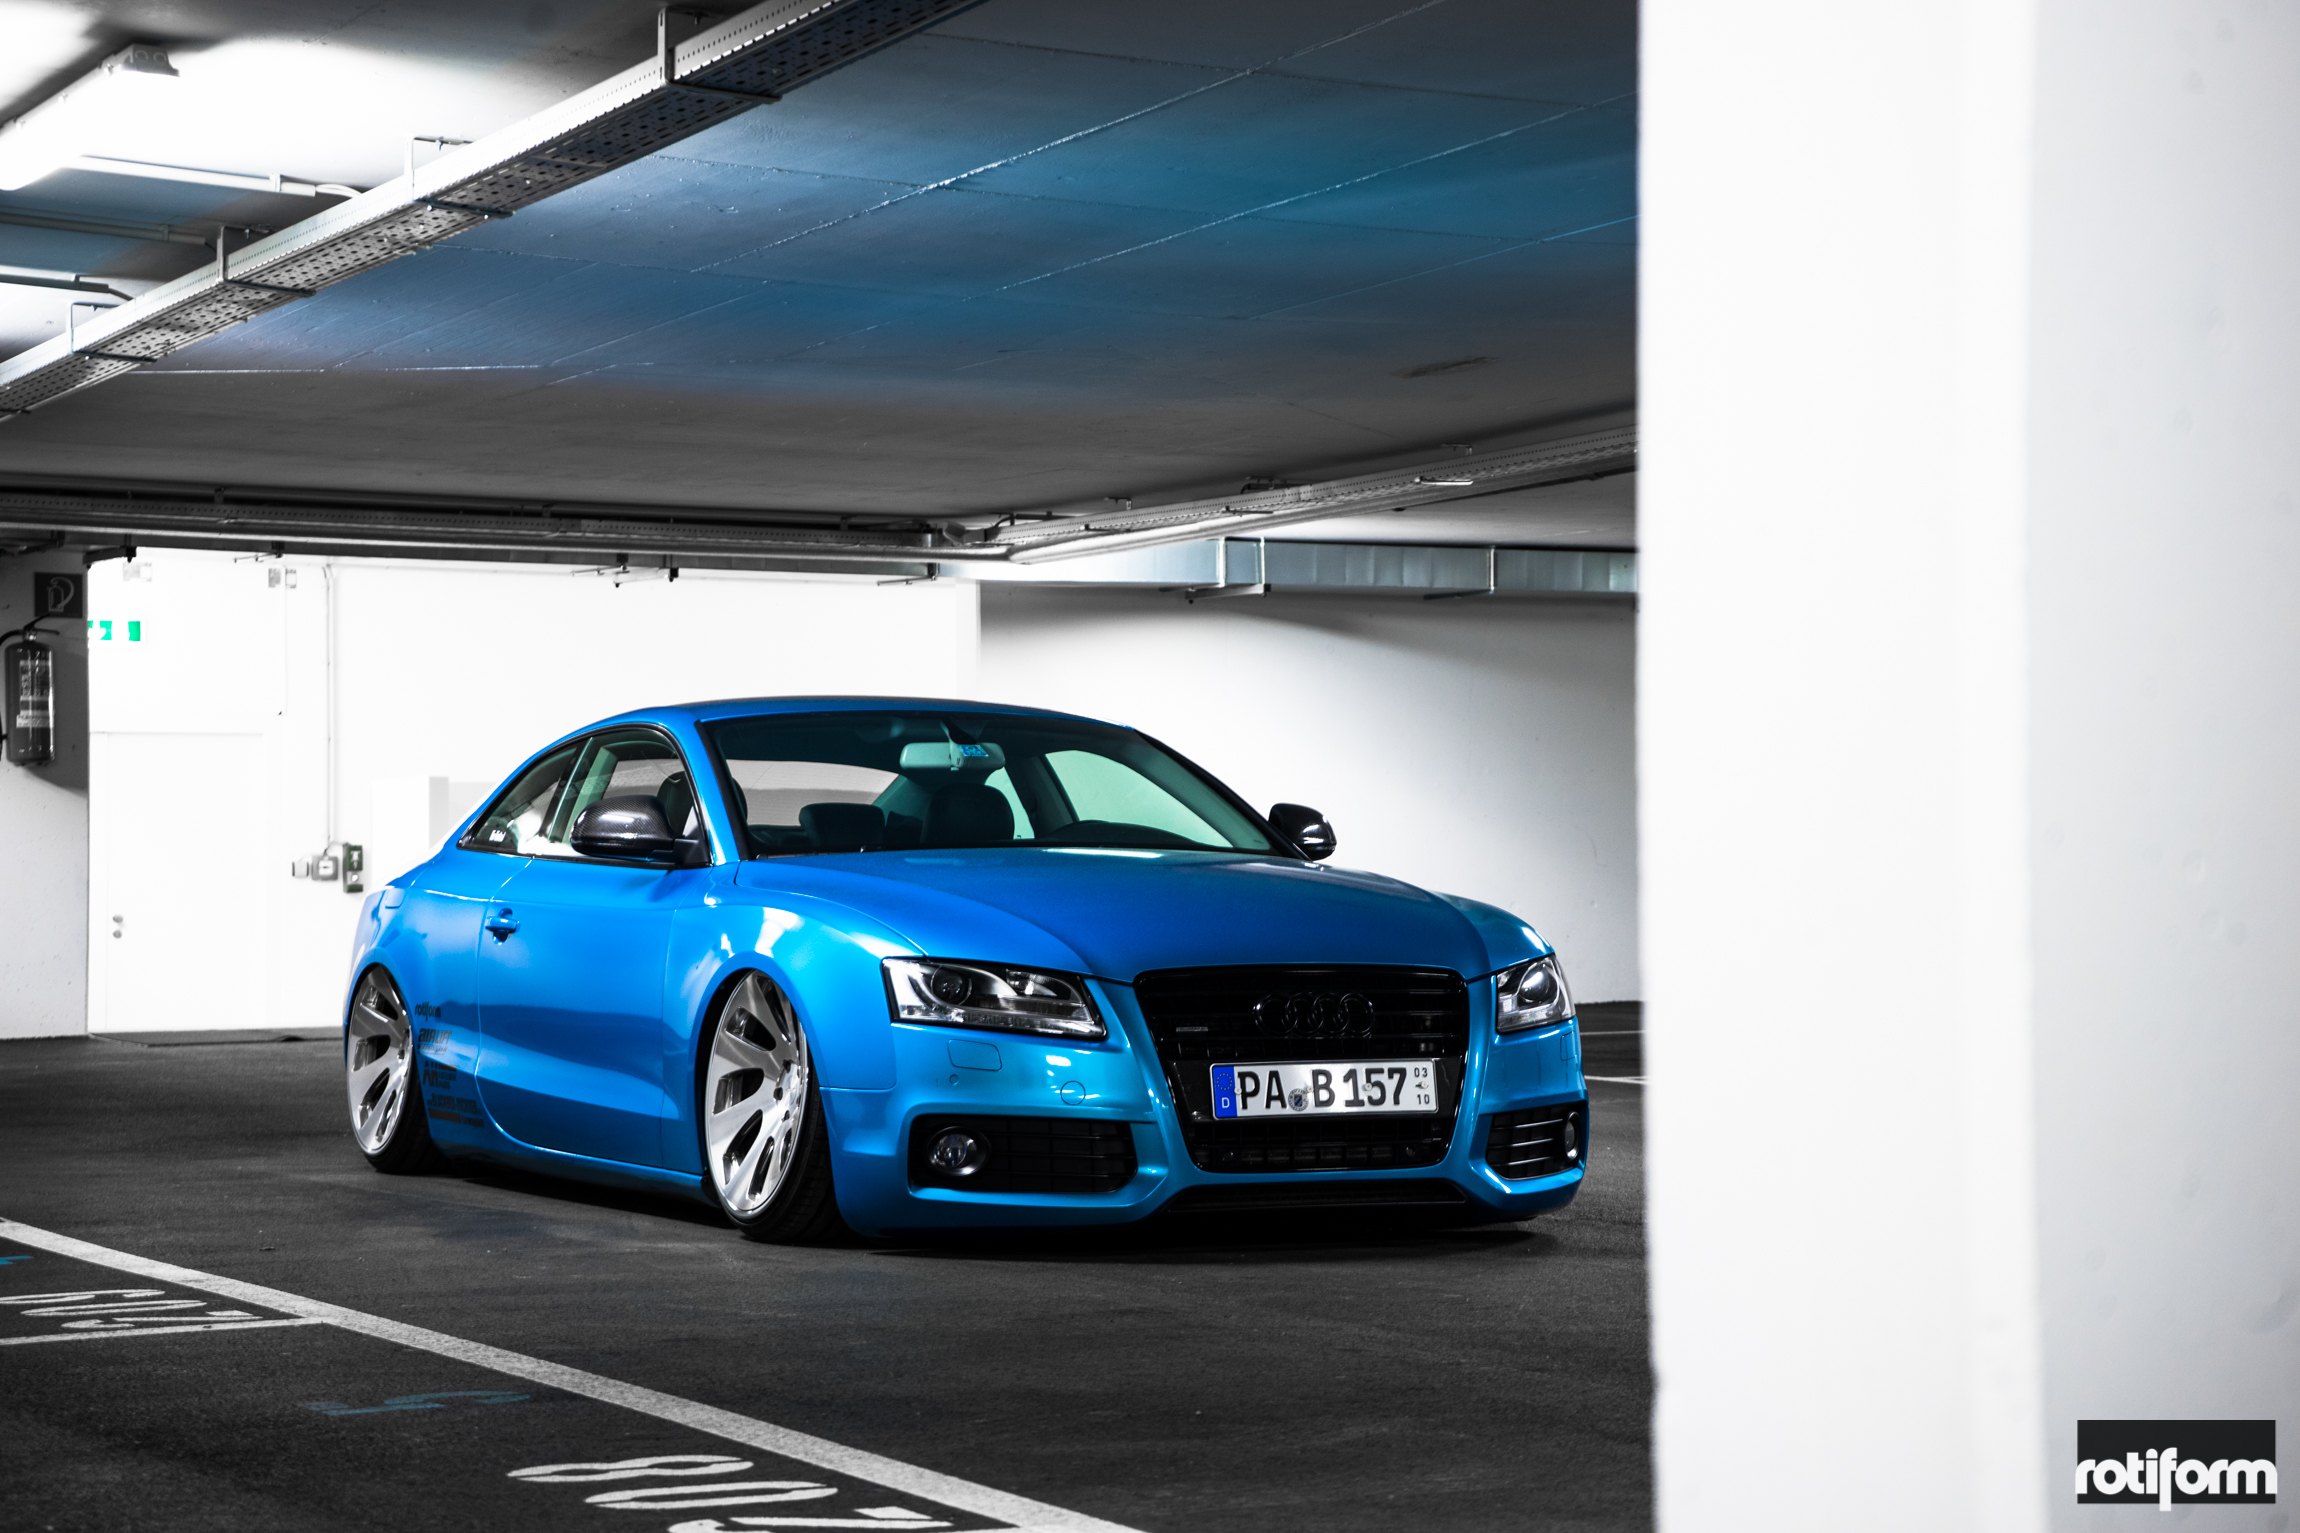 Custom Blue Audi A5 with Blacked Out Grille - Photo by Rotiform